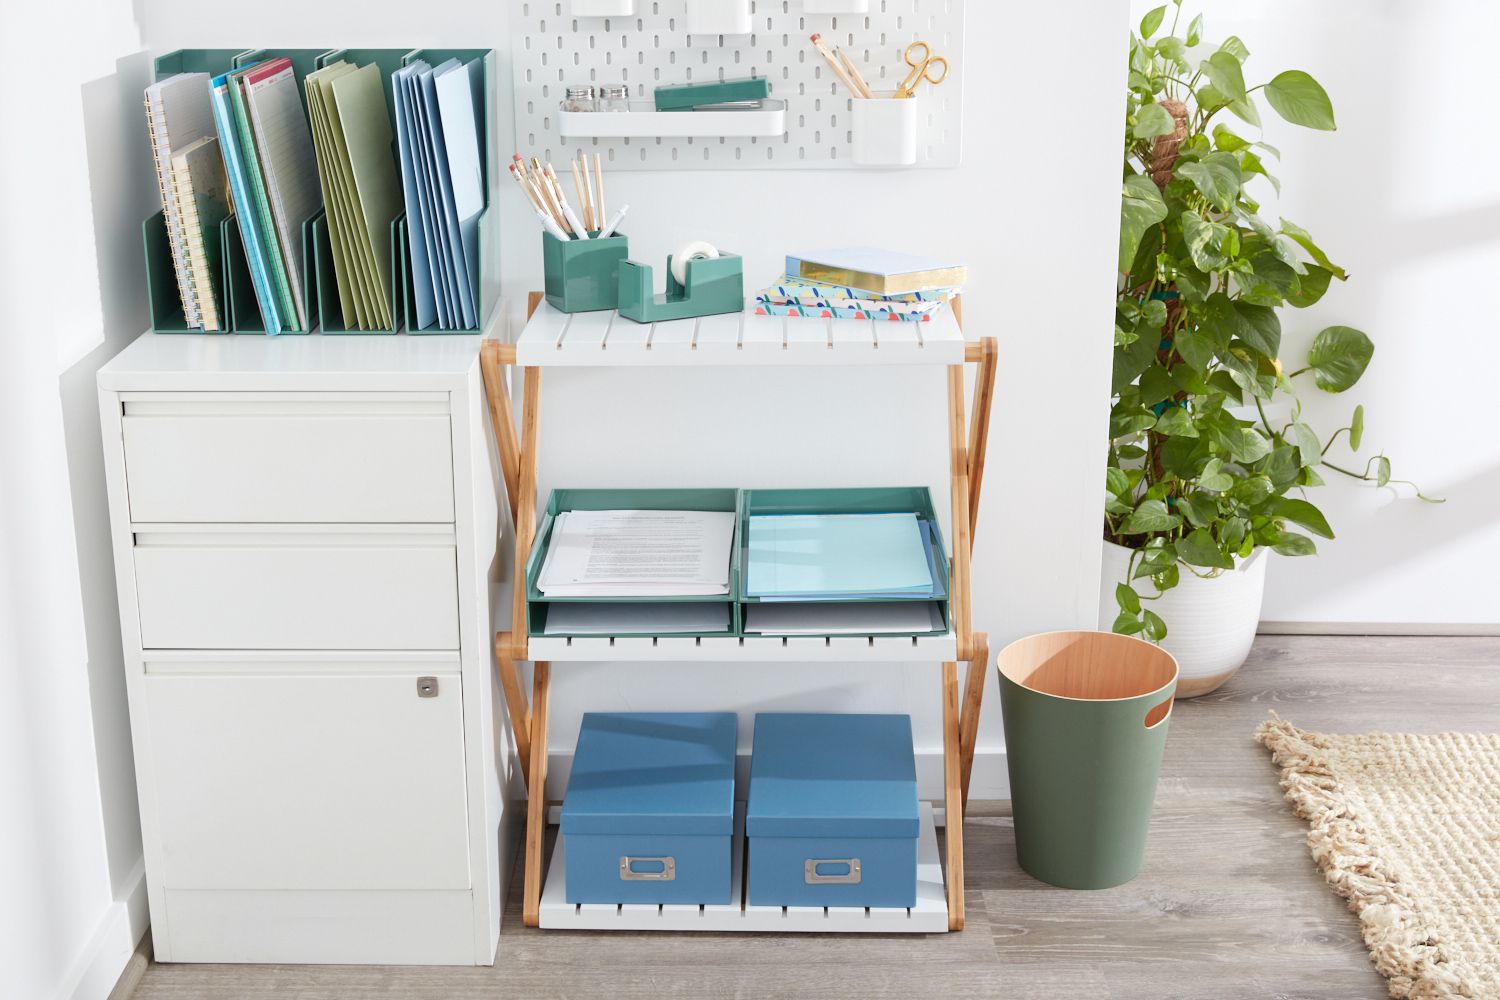 Everything You Need to Set Up a Home Filing System